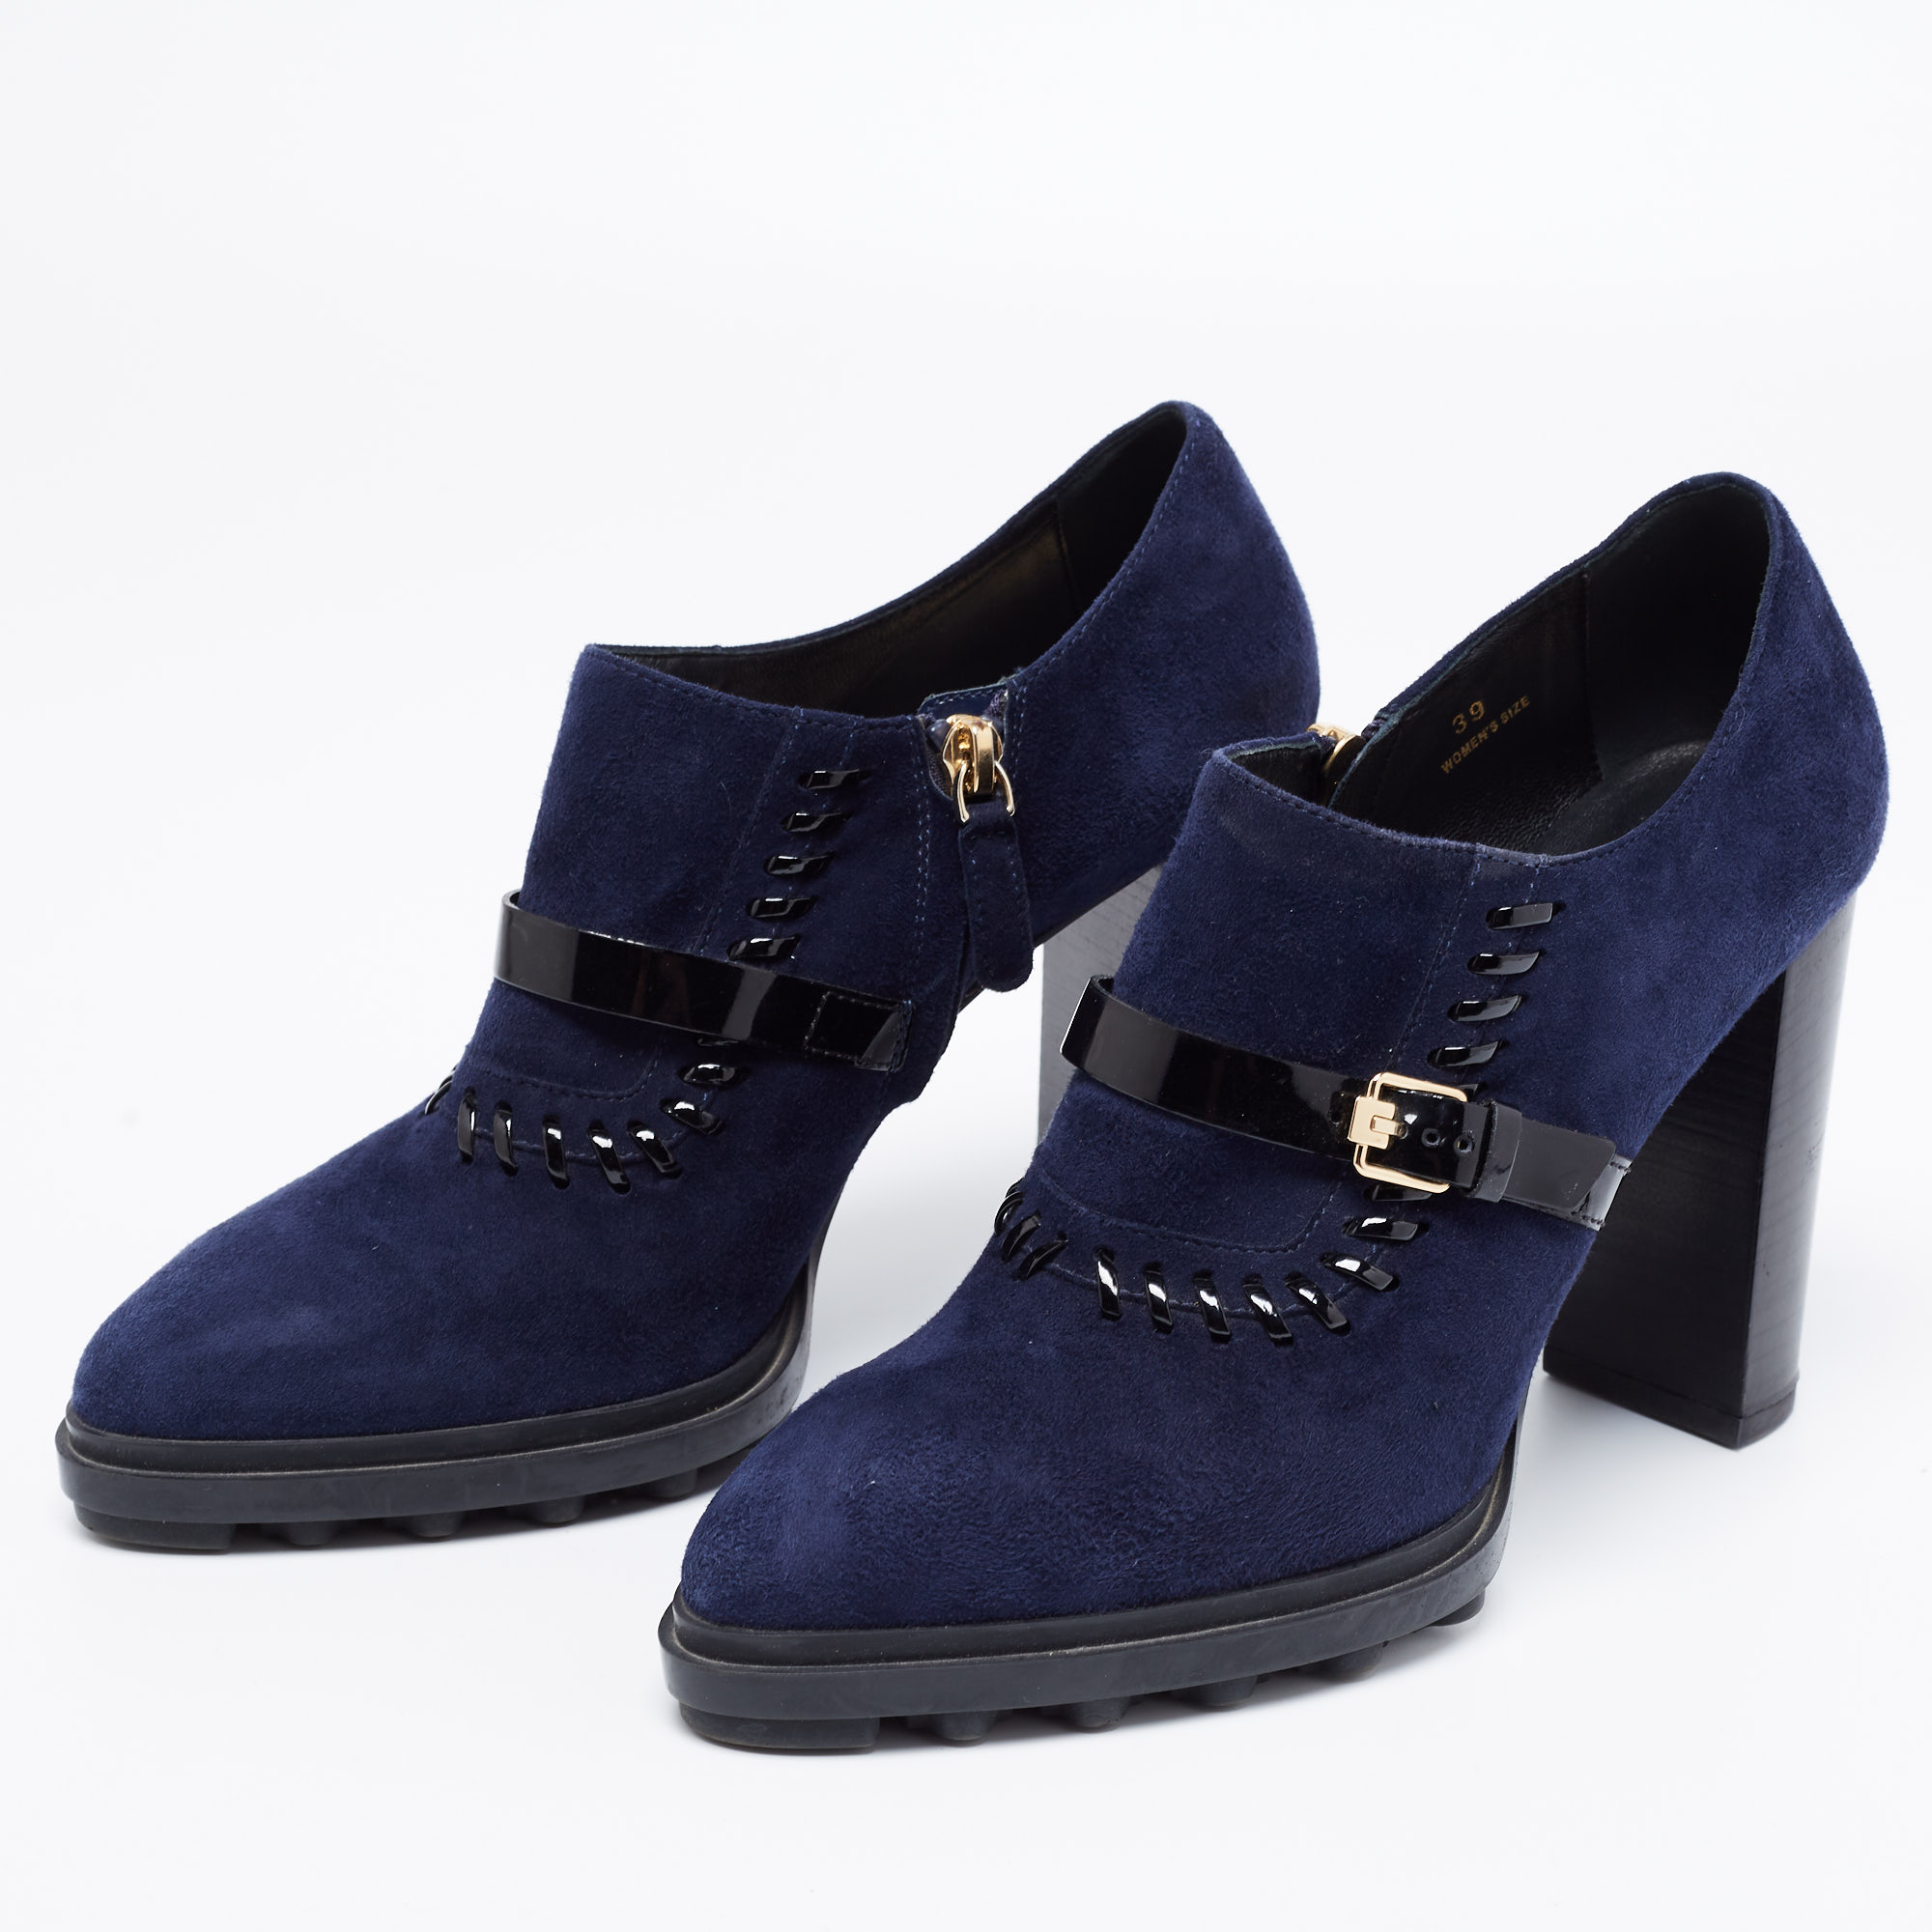 

Tod's Navy Blue/Black Suede And Patent Leather Whipstitch Detail Ankle Booties Size